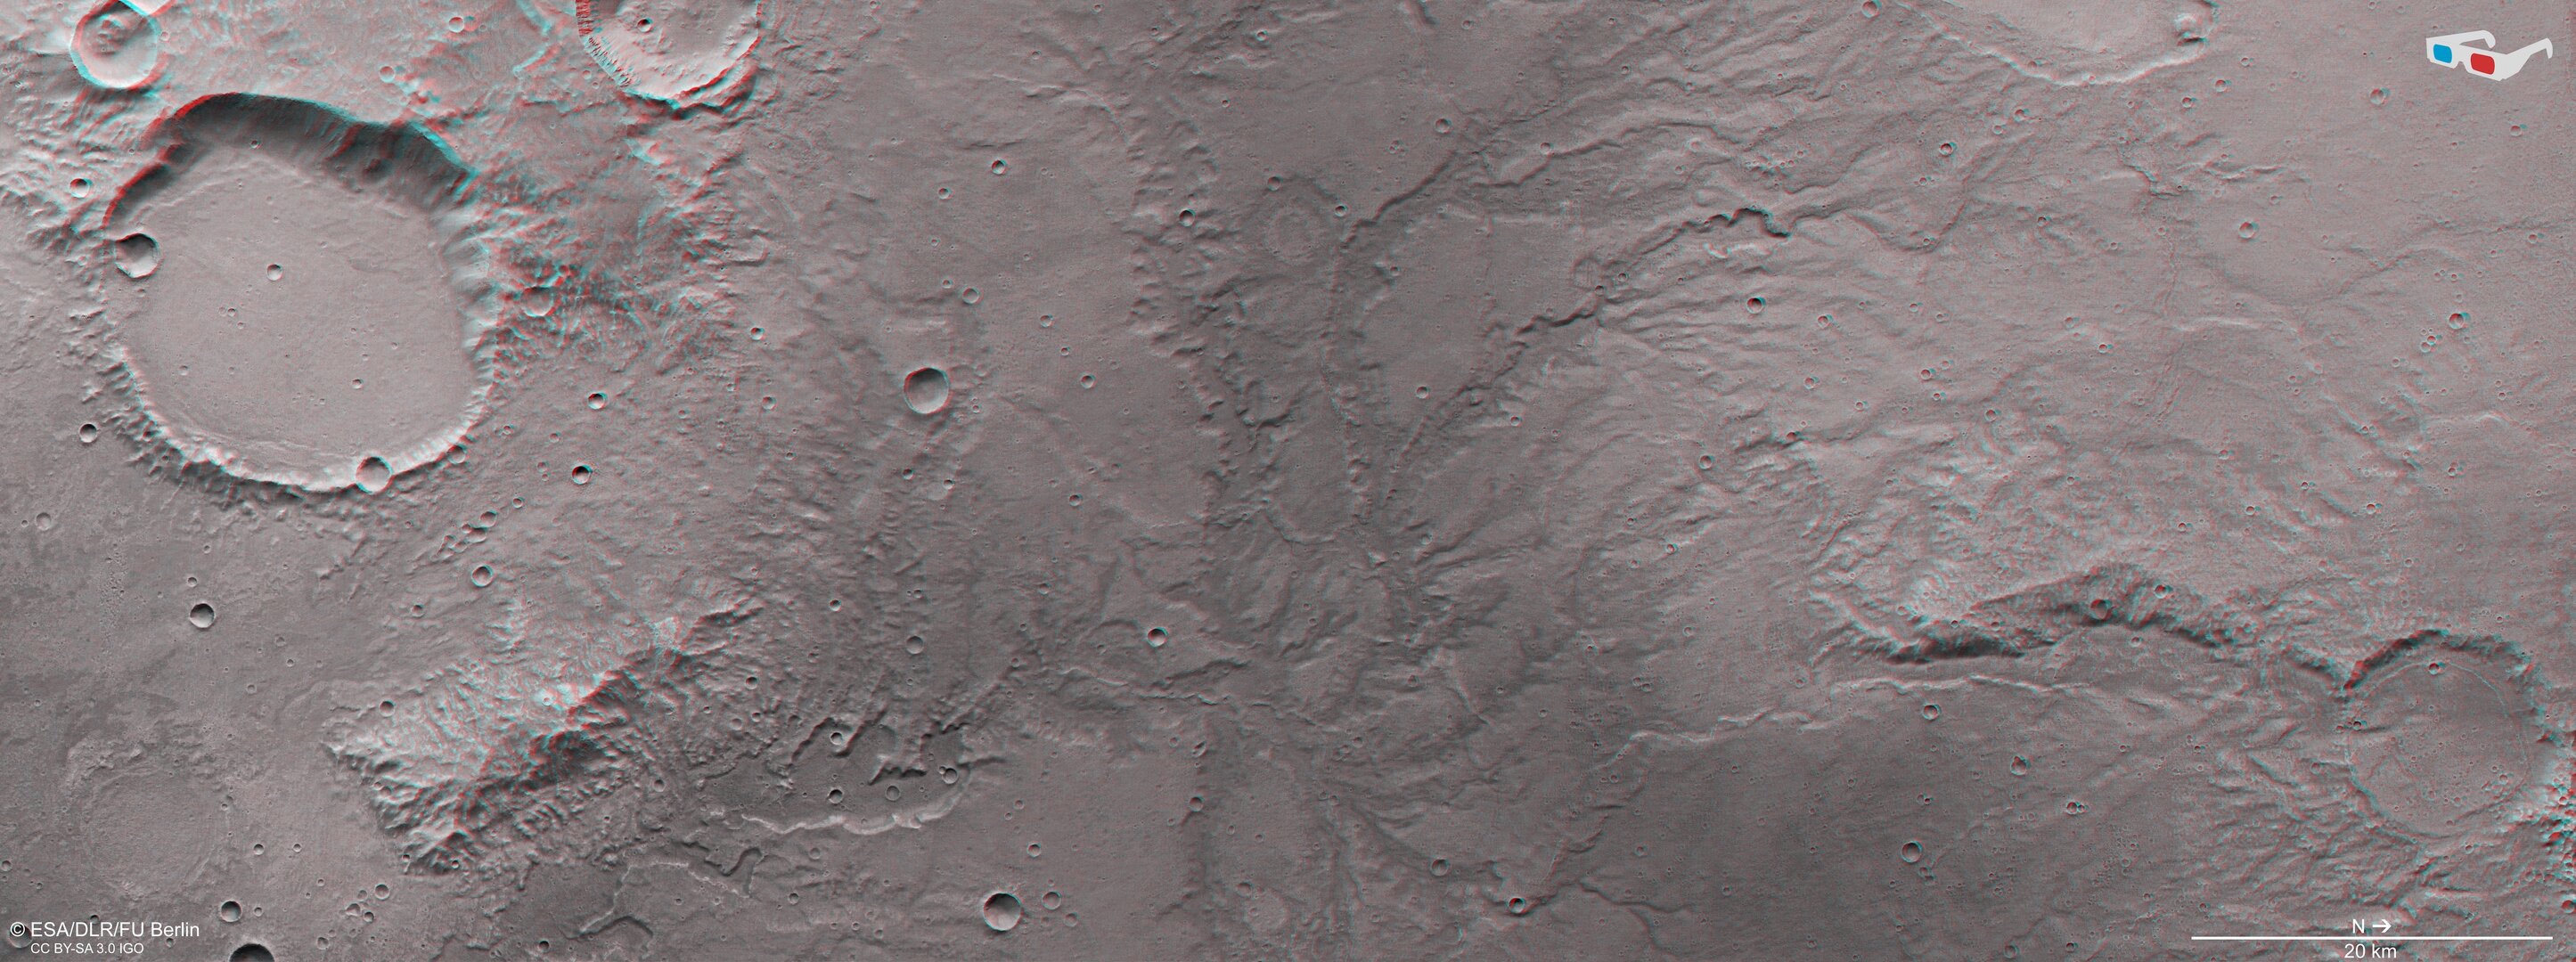 Mars river valley network in 3D